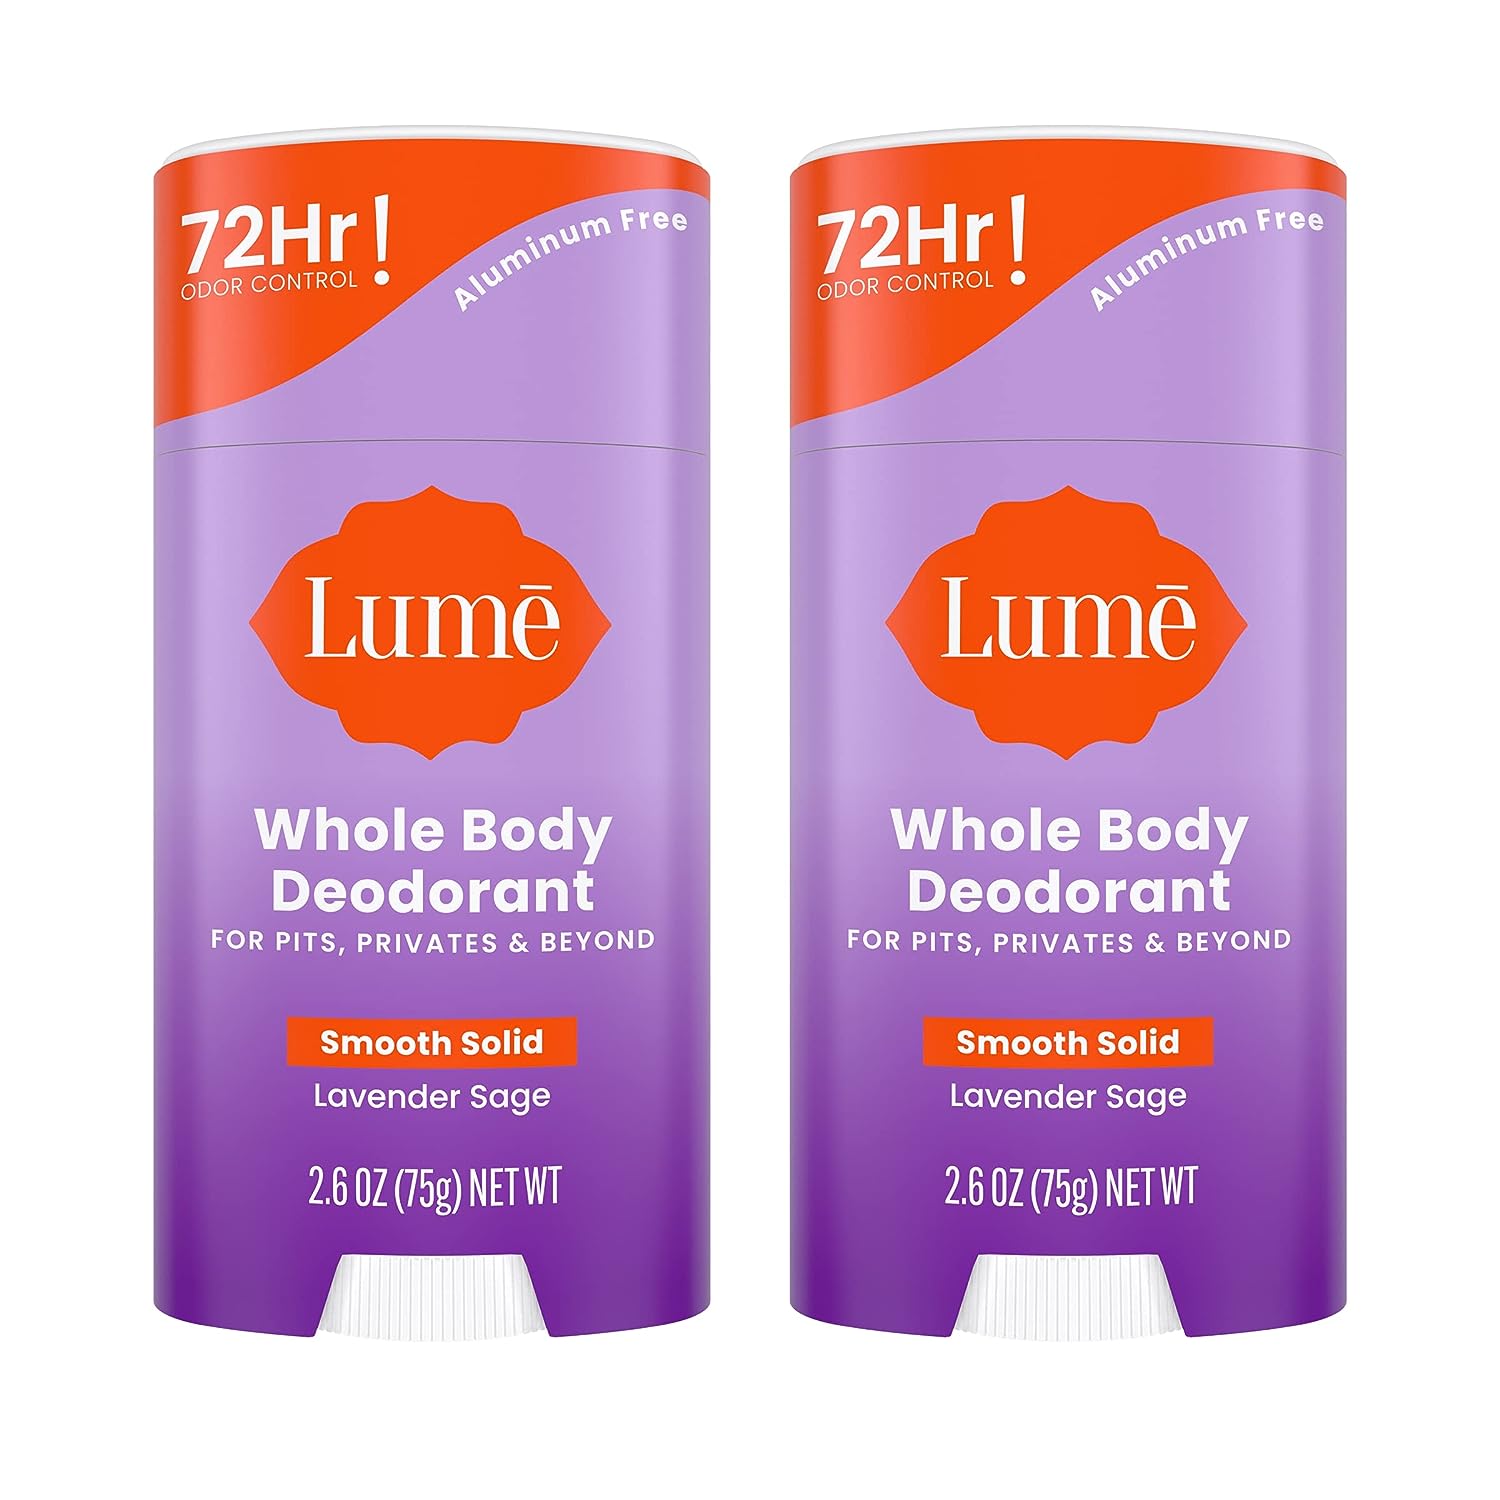 Lume Whole Body Deodorant - Smooth Solid Stic…